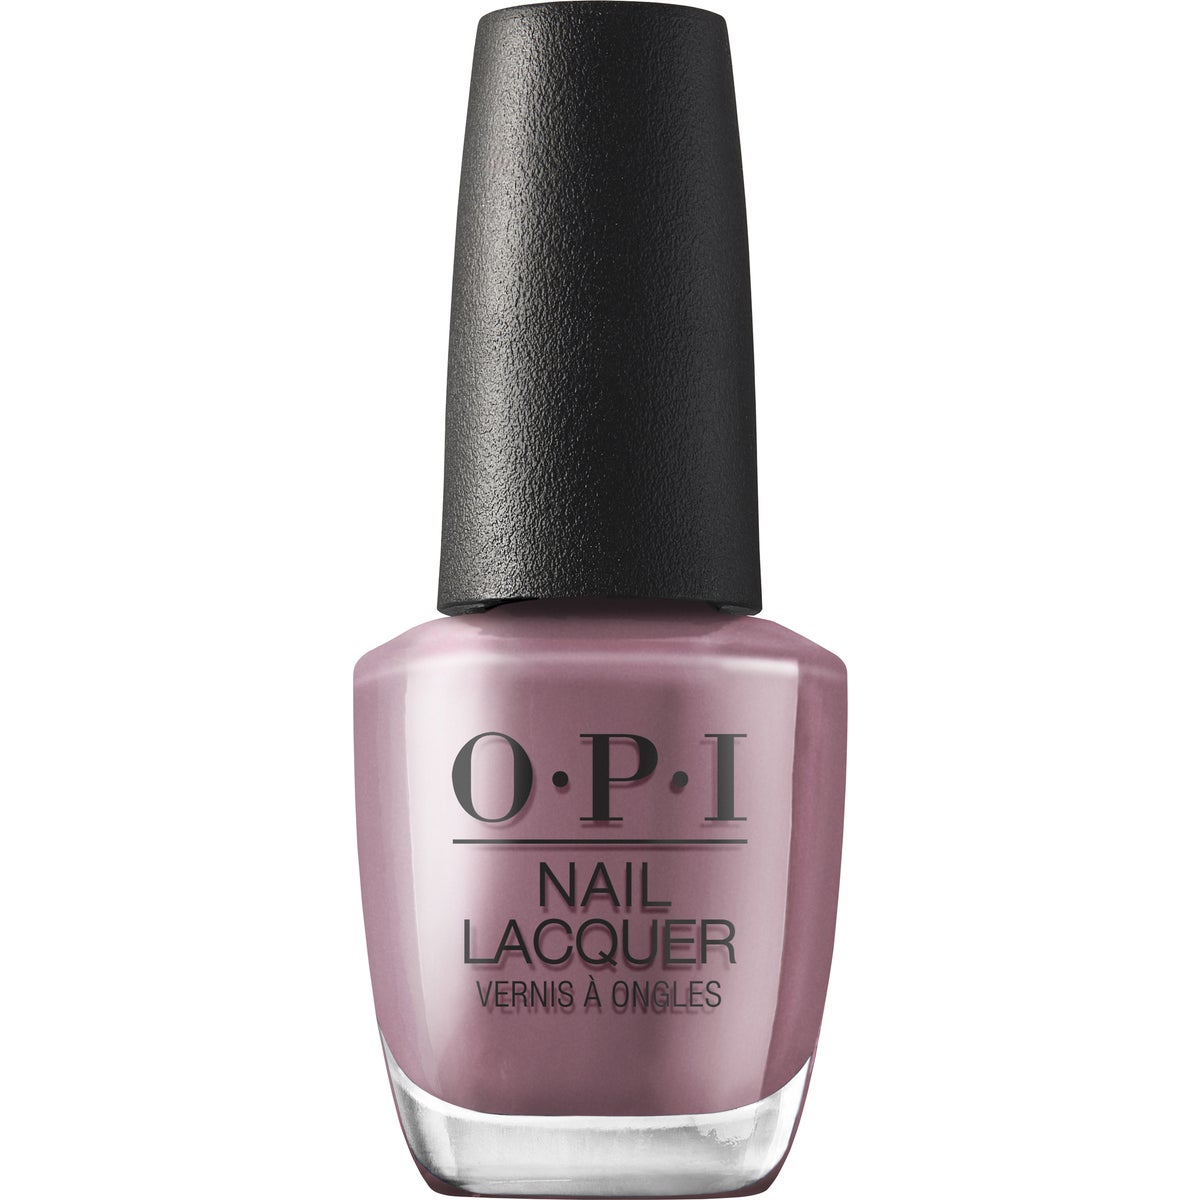 OPI Nail Lacquer - Claydreaming